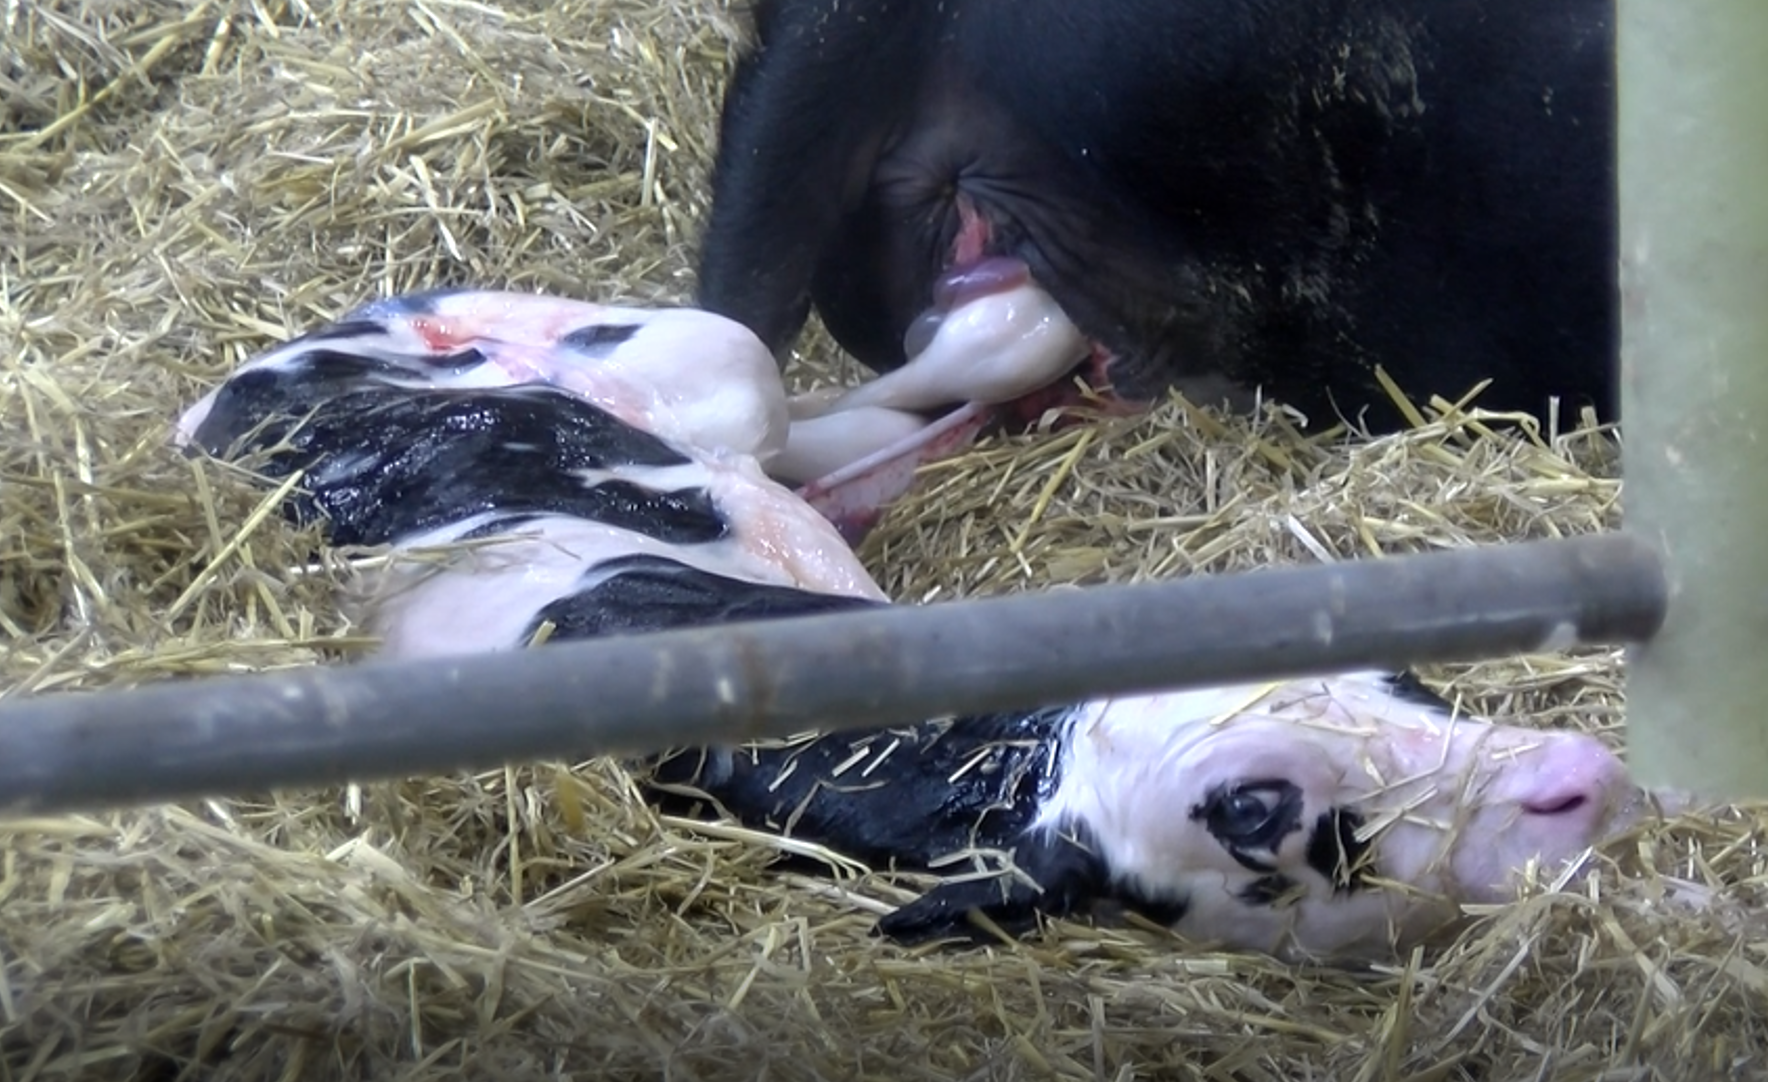 Freshly born Holstein calf, still covered in amniotic fluid on a straw bedding pack.